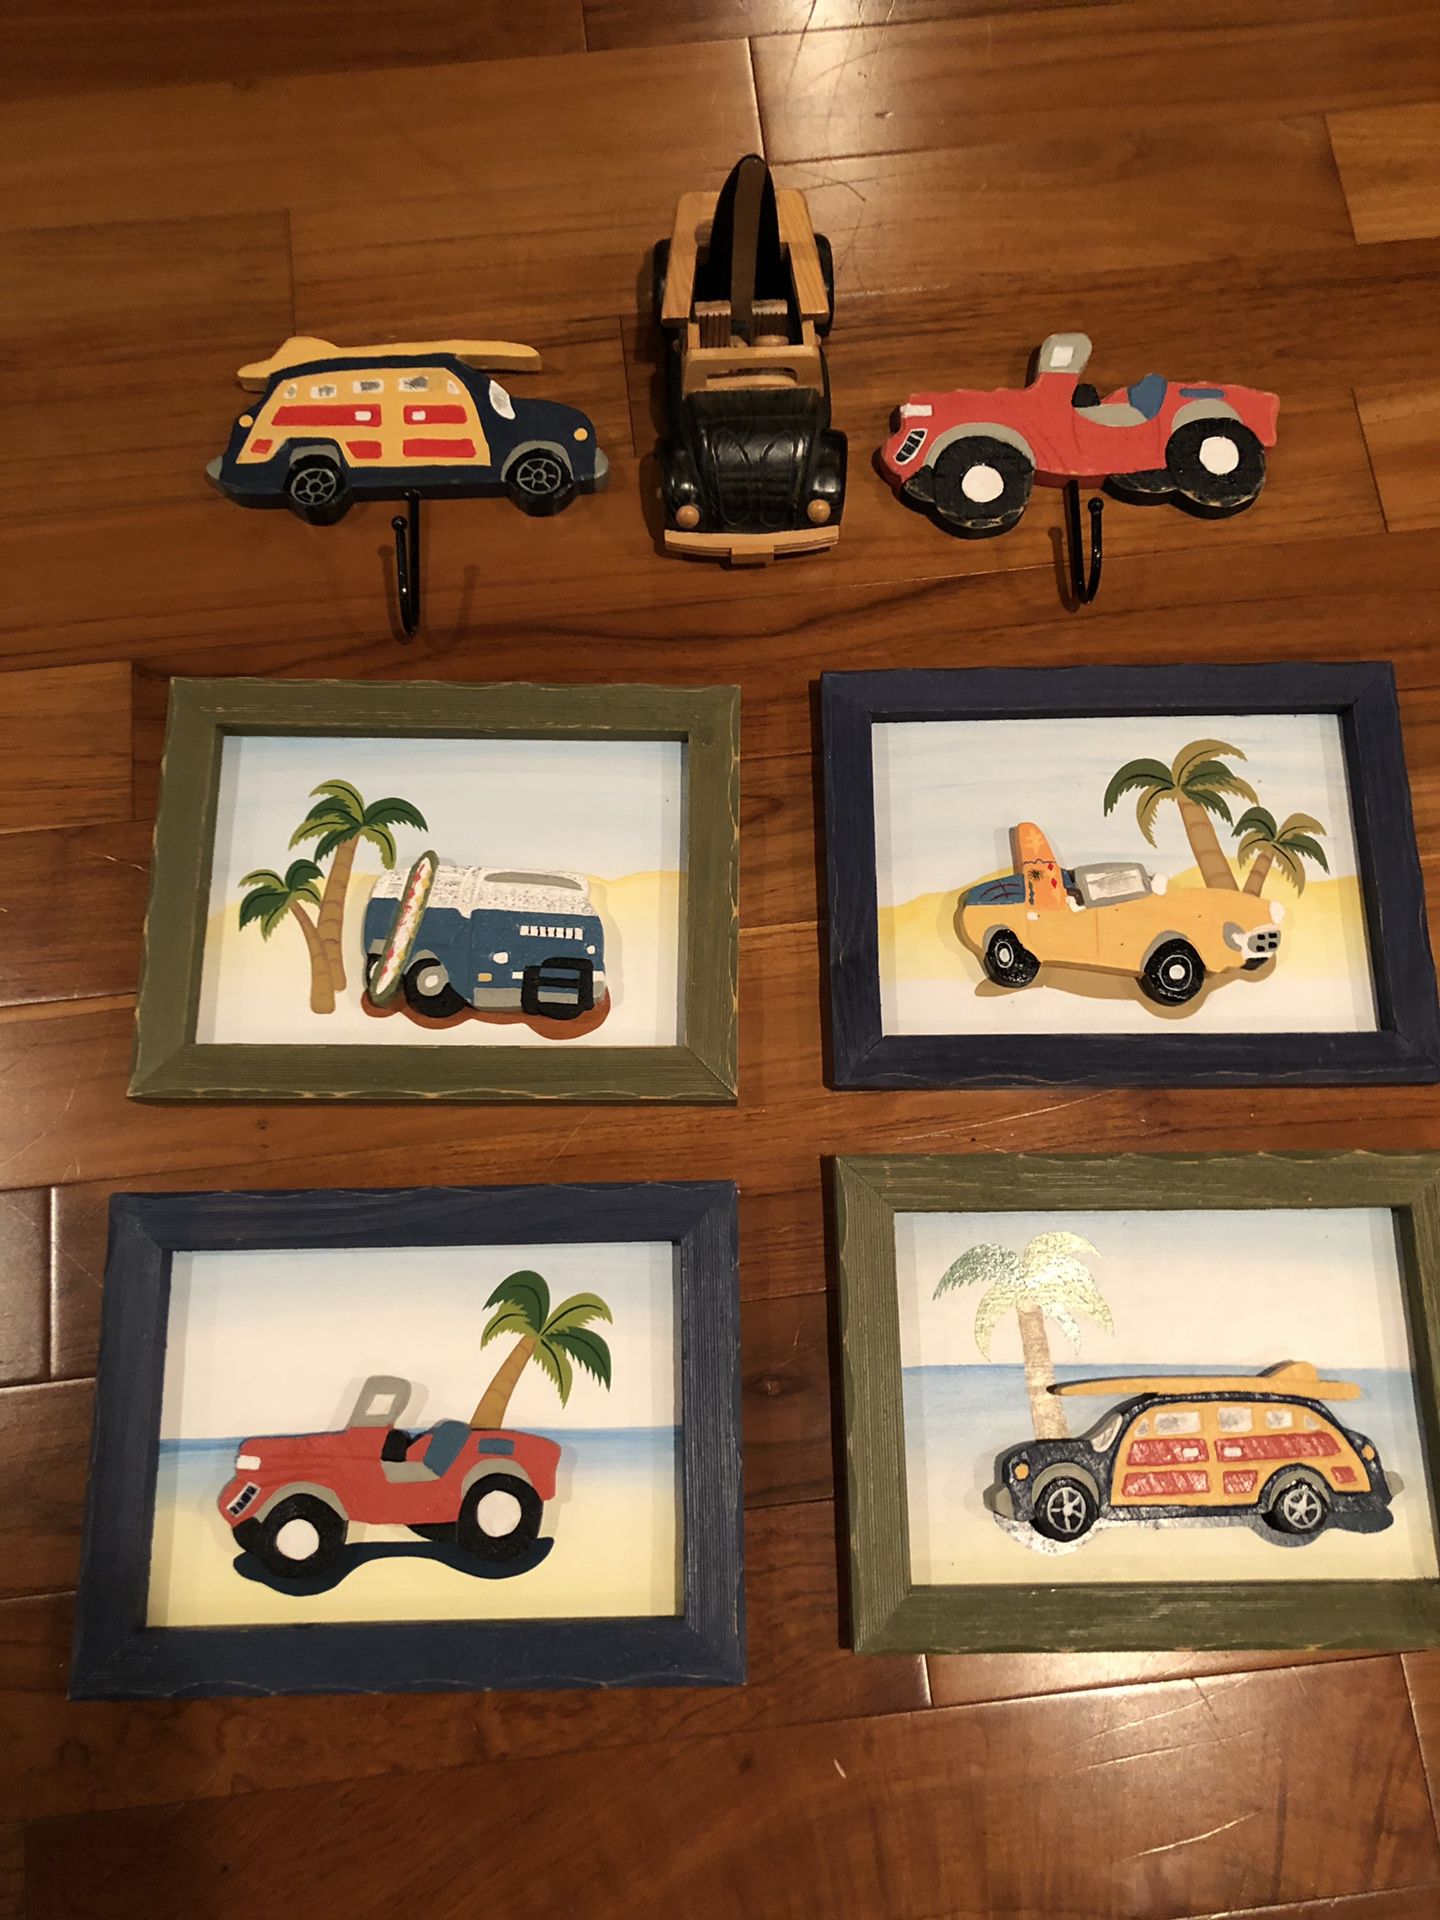 Pier One kids vintage beach decor. Three dimensional wood framed art, hooks, and convertible wooden model car with surfboard.